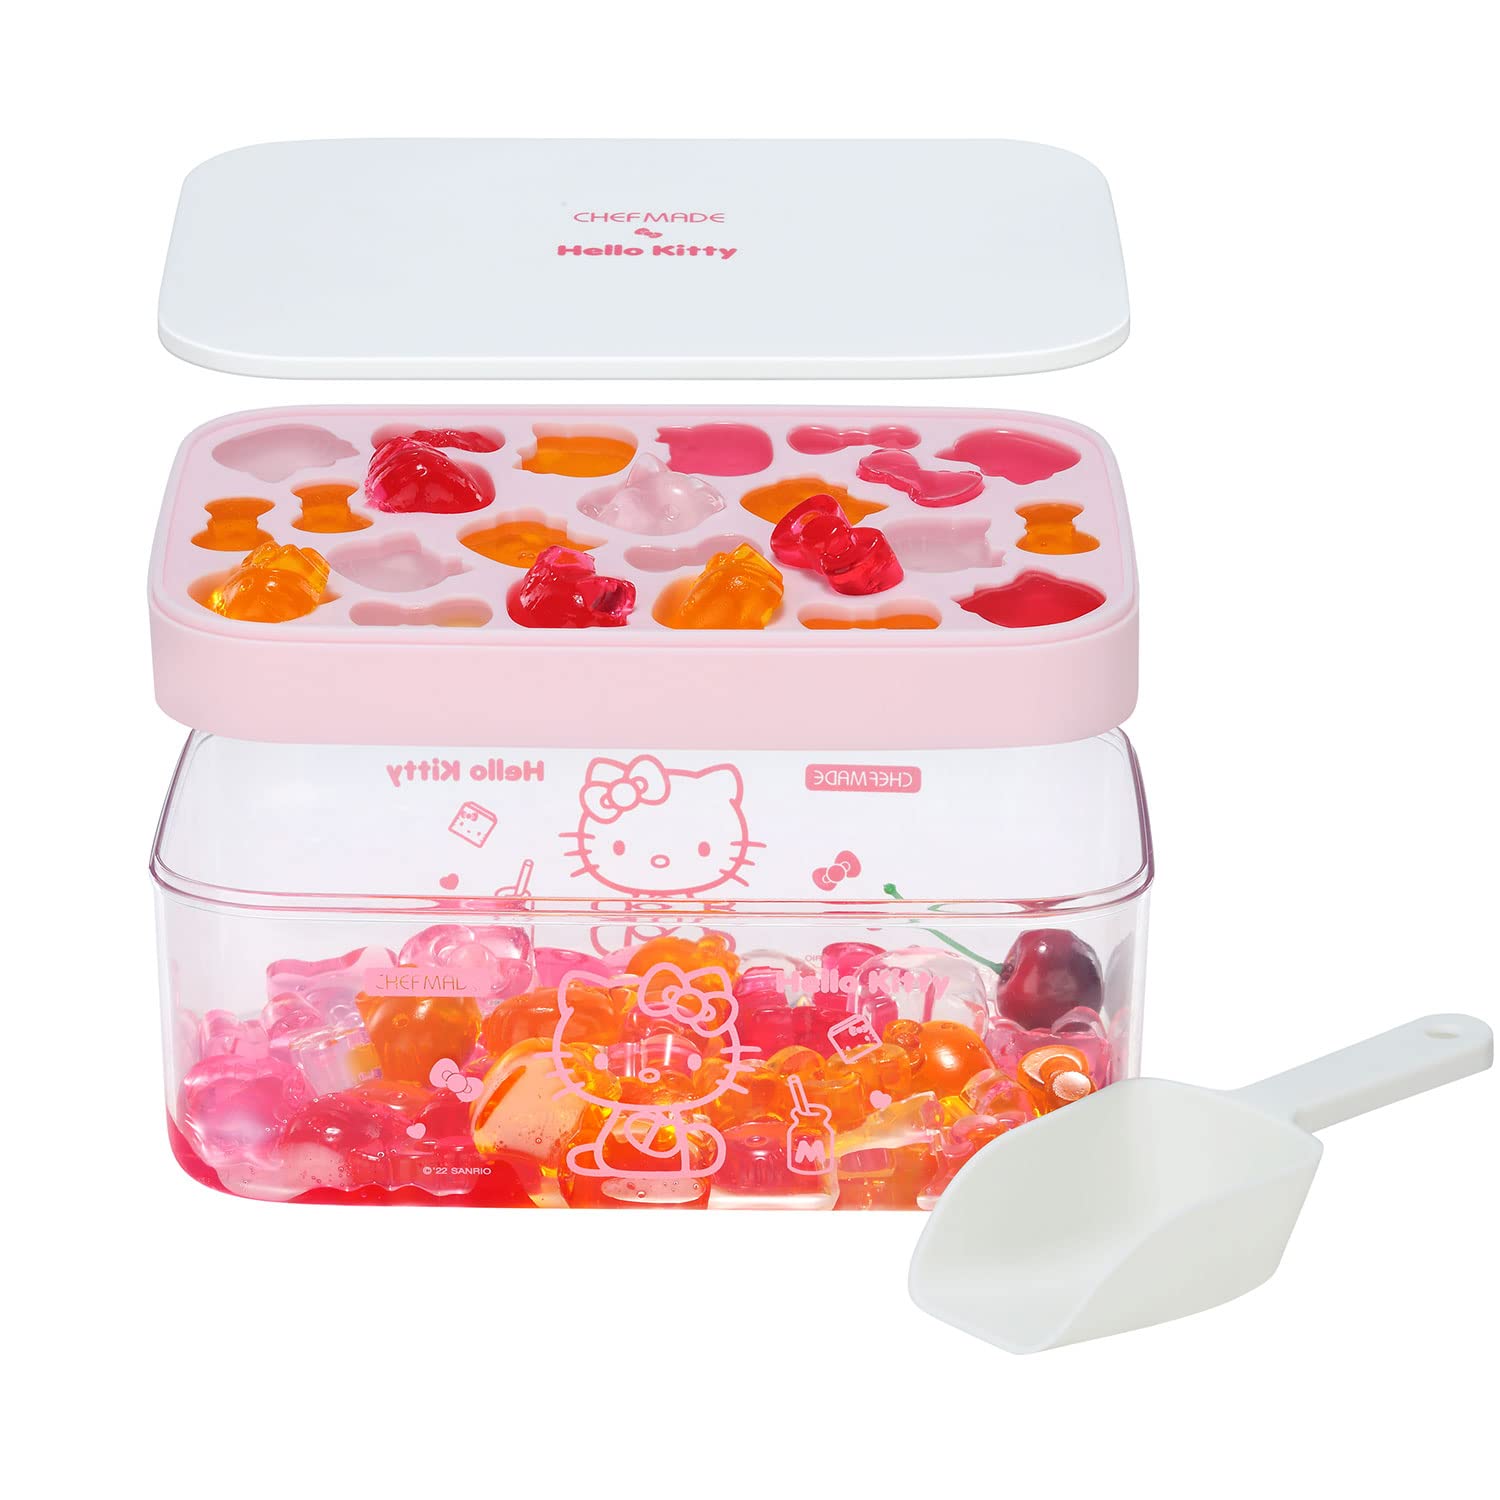 Chefmade學廚KT7110新品現貨4件套多層儲冰冰格盒Hello Kitty Ice Cube Tray with Lid container & scoop